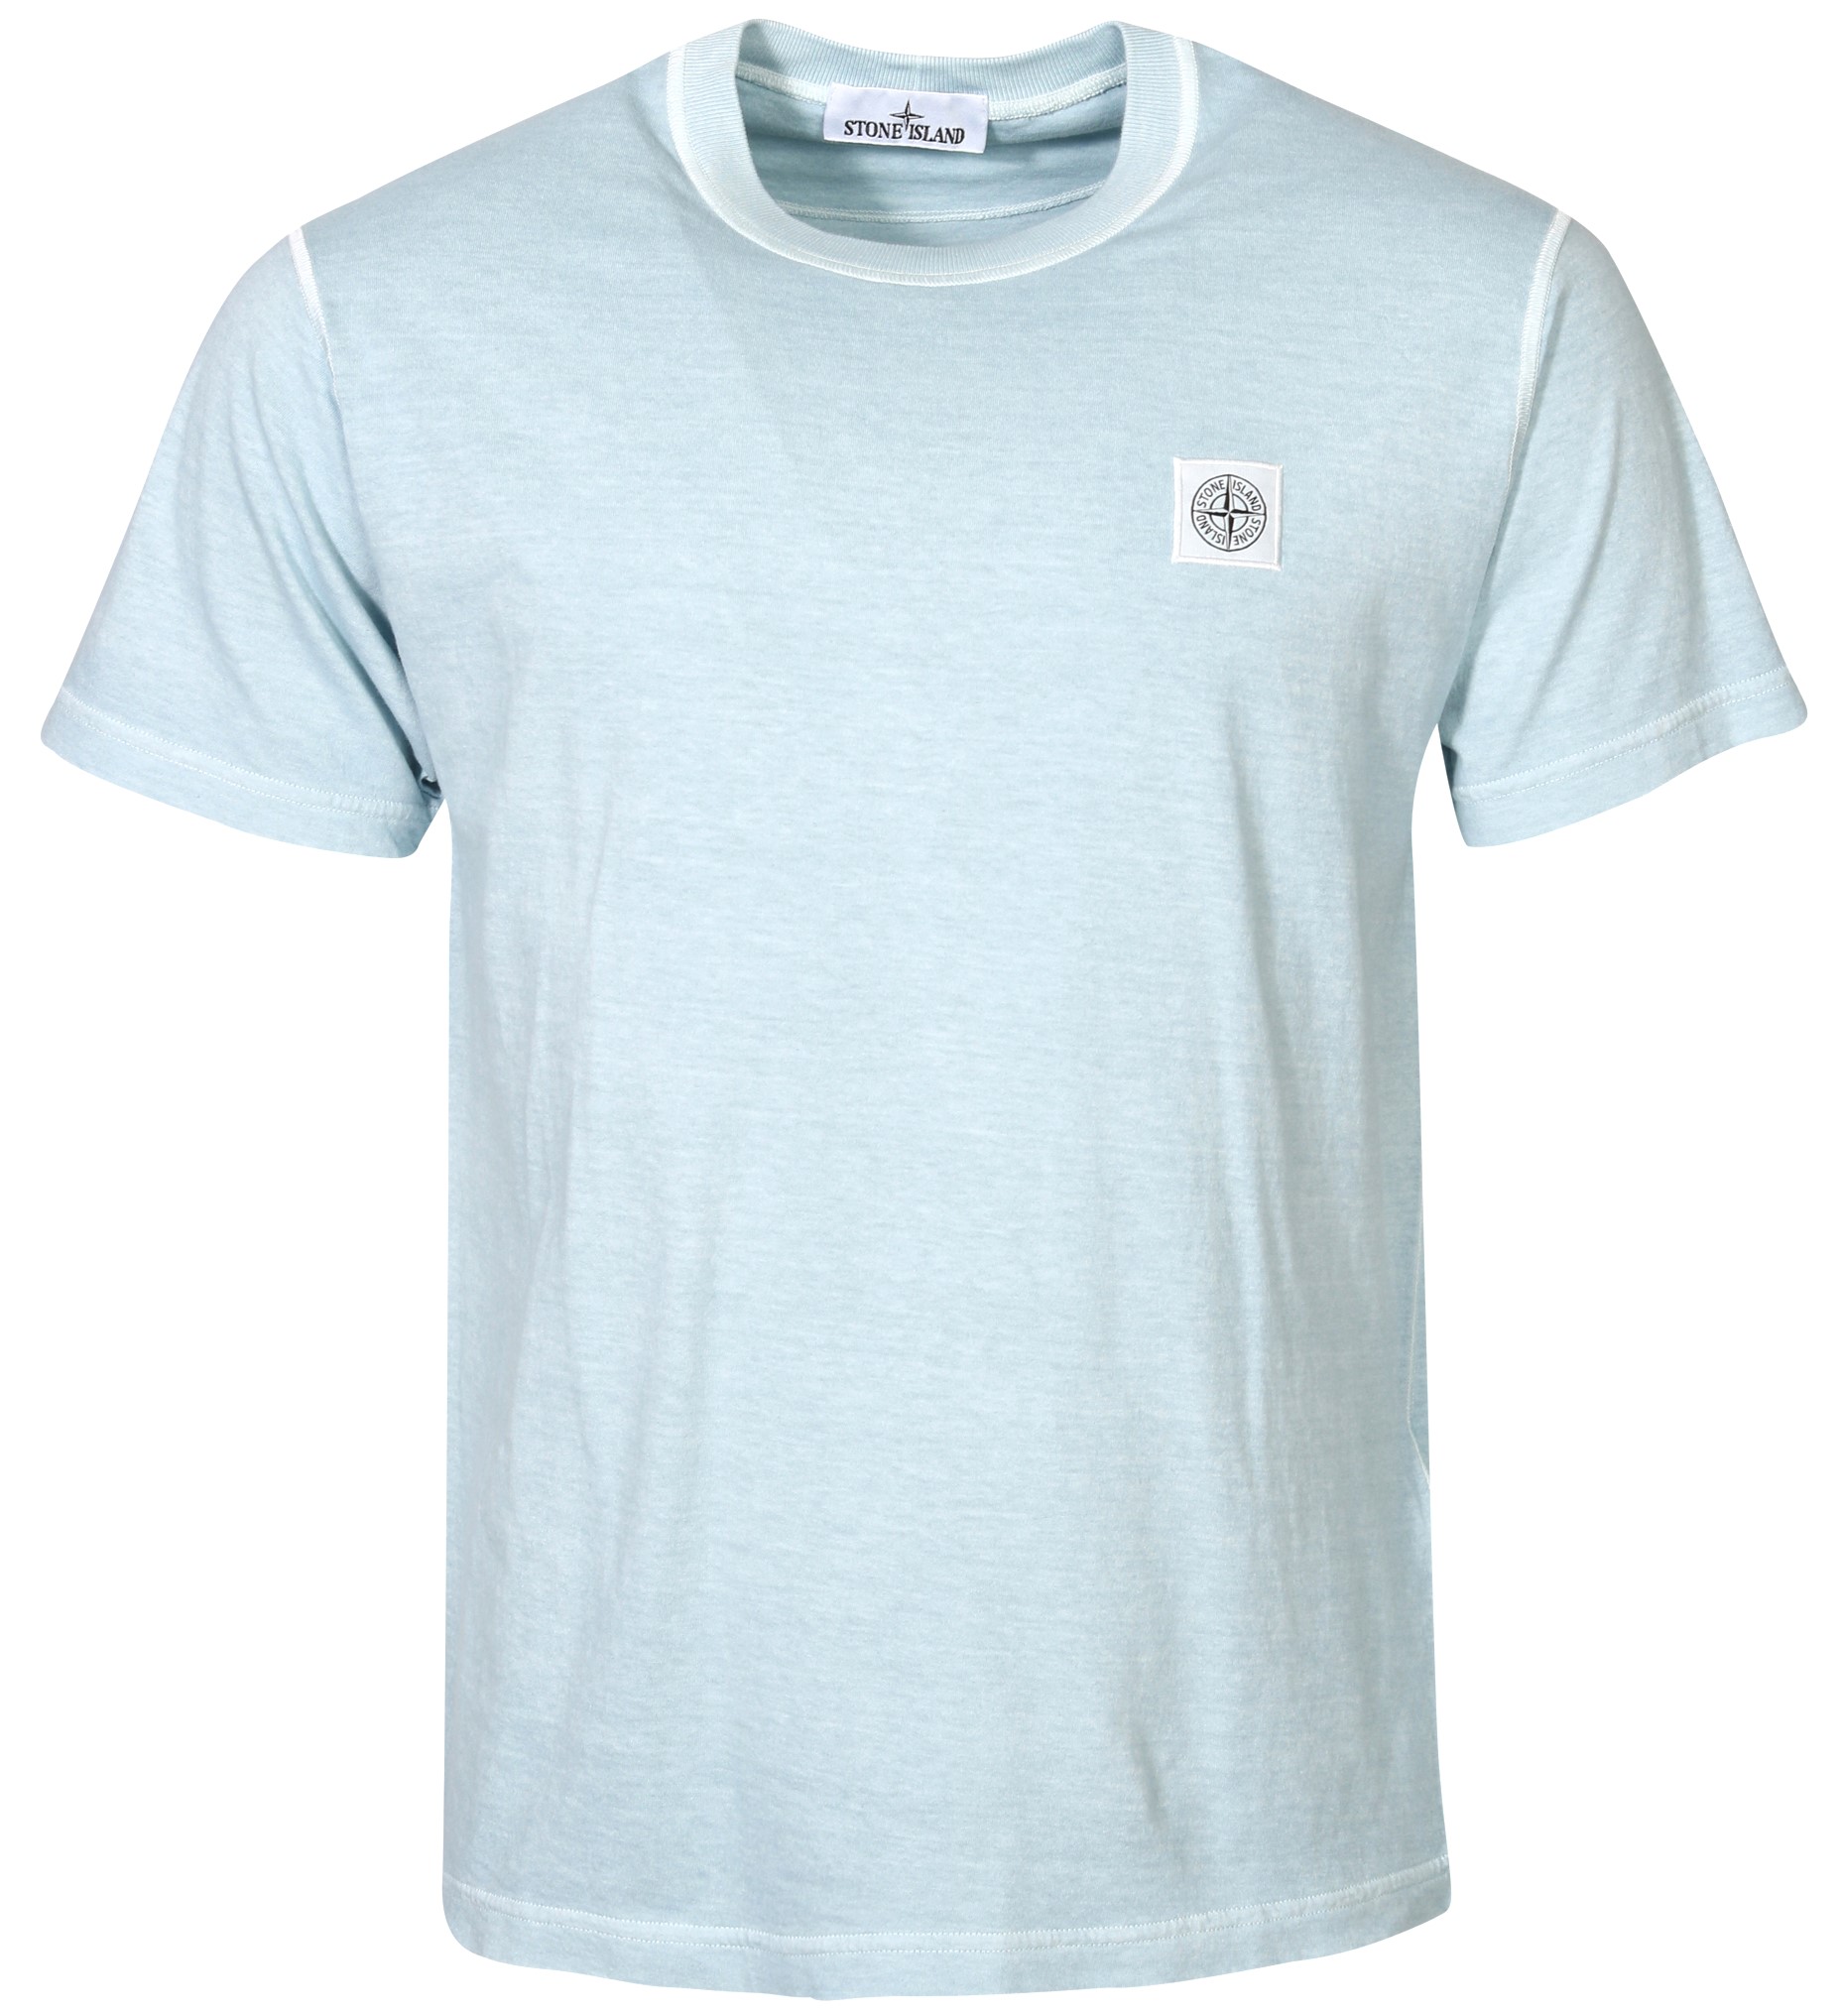 STONE ISLAND T-Shirt in Washed Sky Blue S